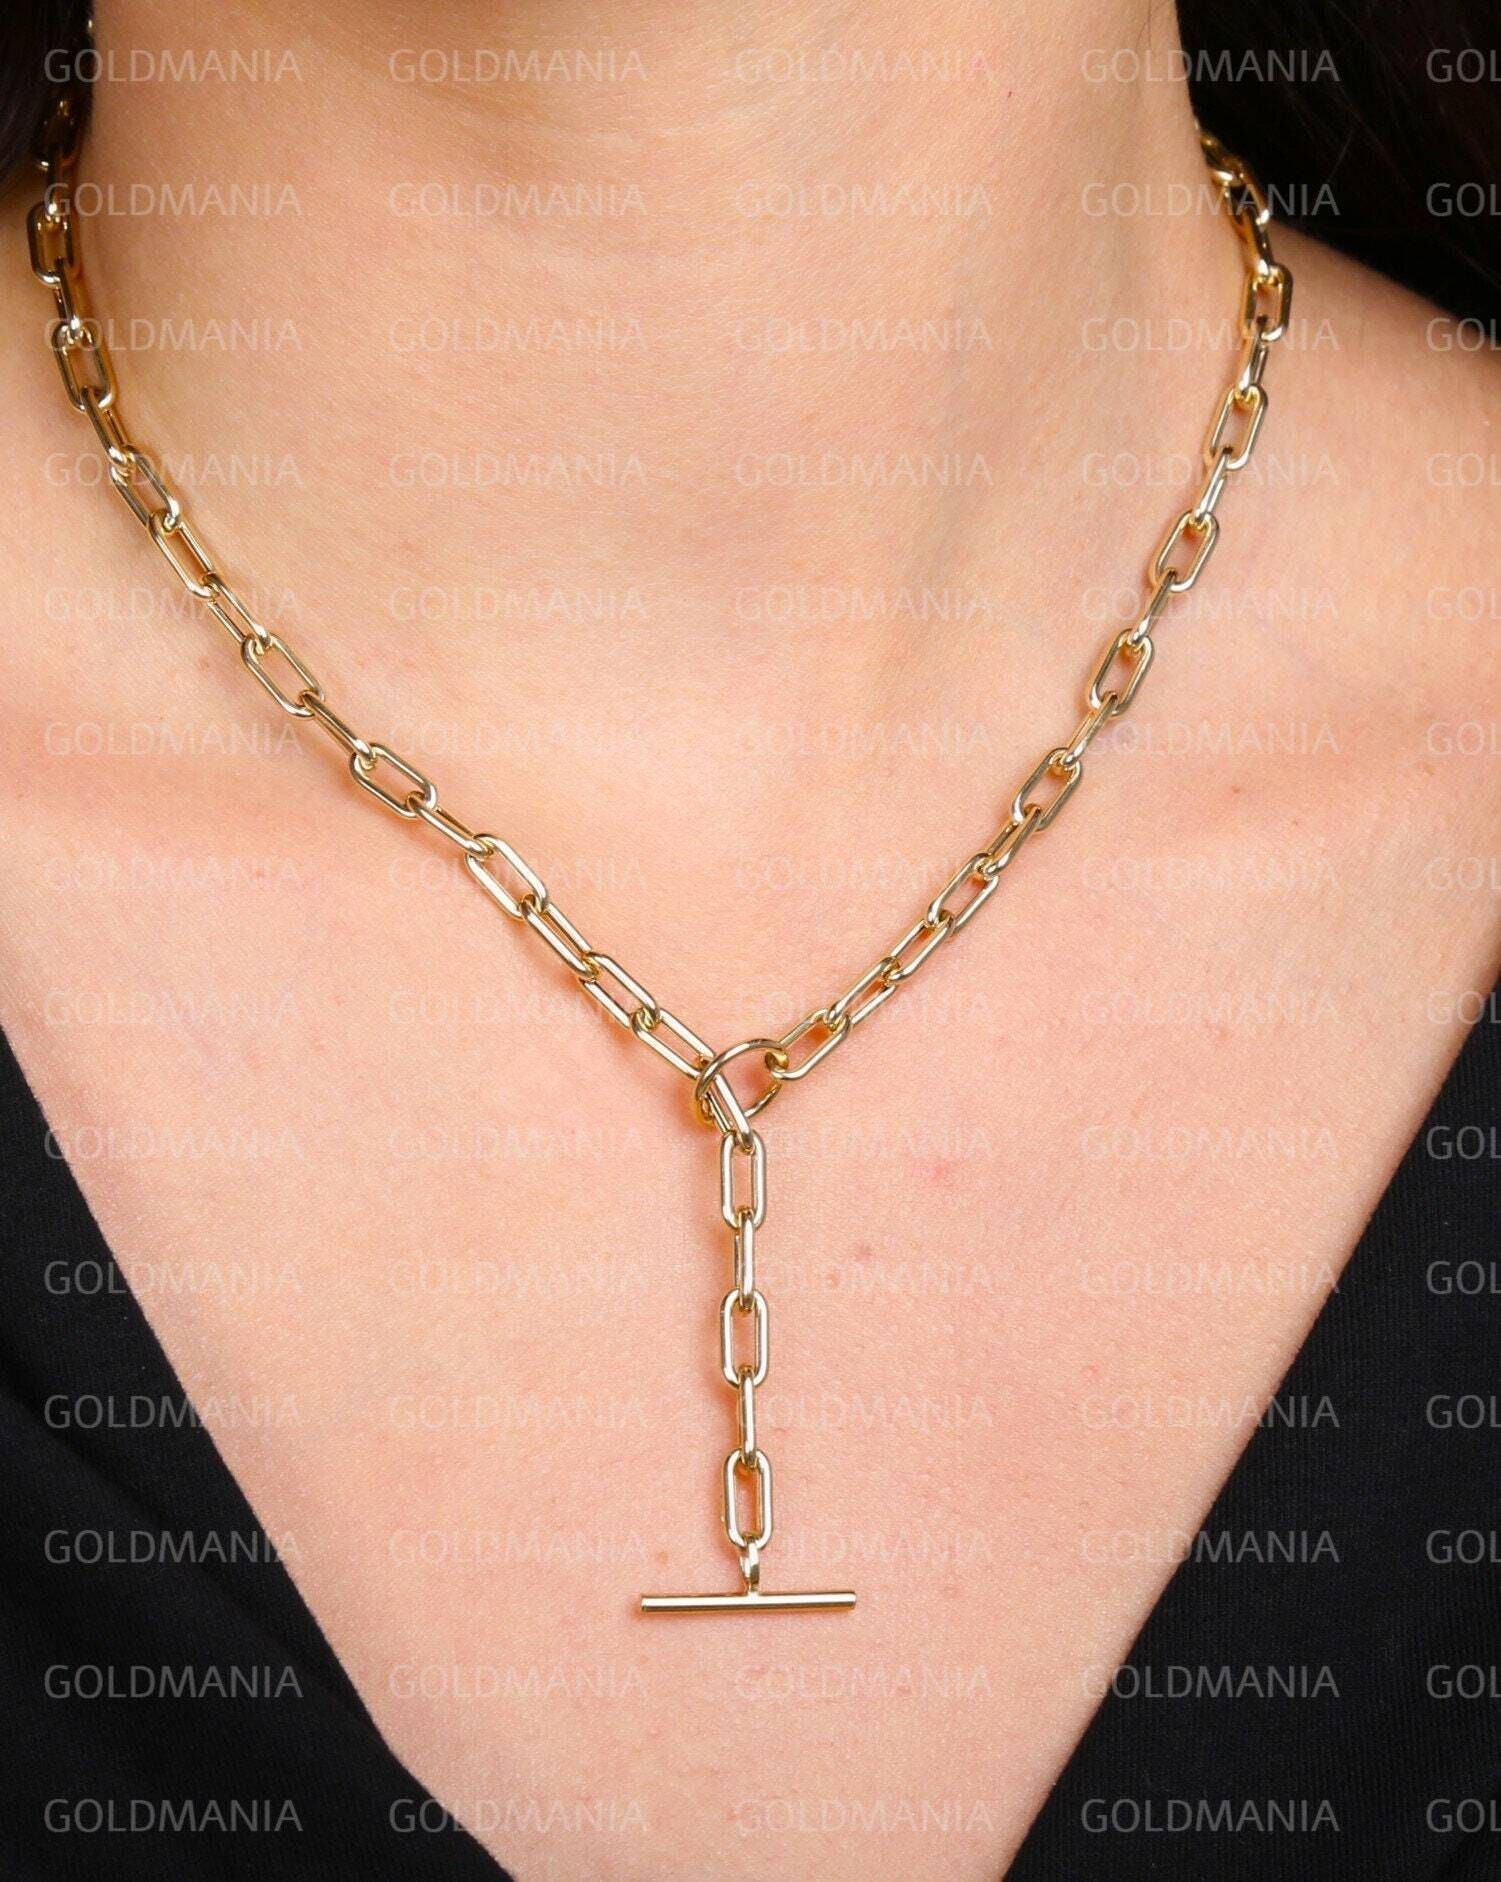 Delicate Dainty 14K Gold Drawn Cable Chain Toggle Clasp Necklace, on Trend Gold Toggle Necklace, Minimalist Toggle Closure Gold Necklace